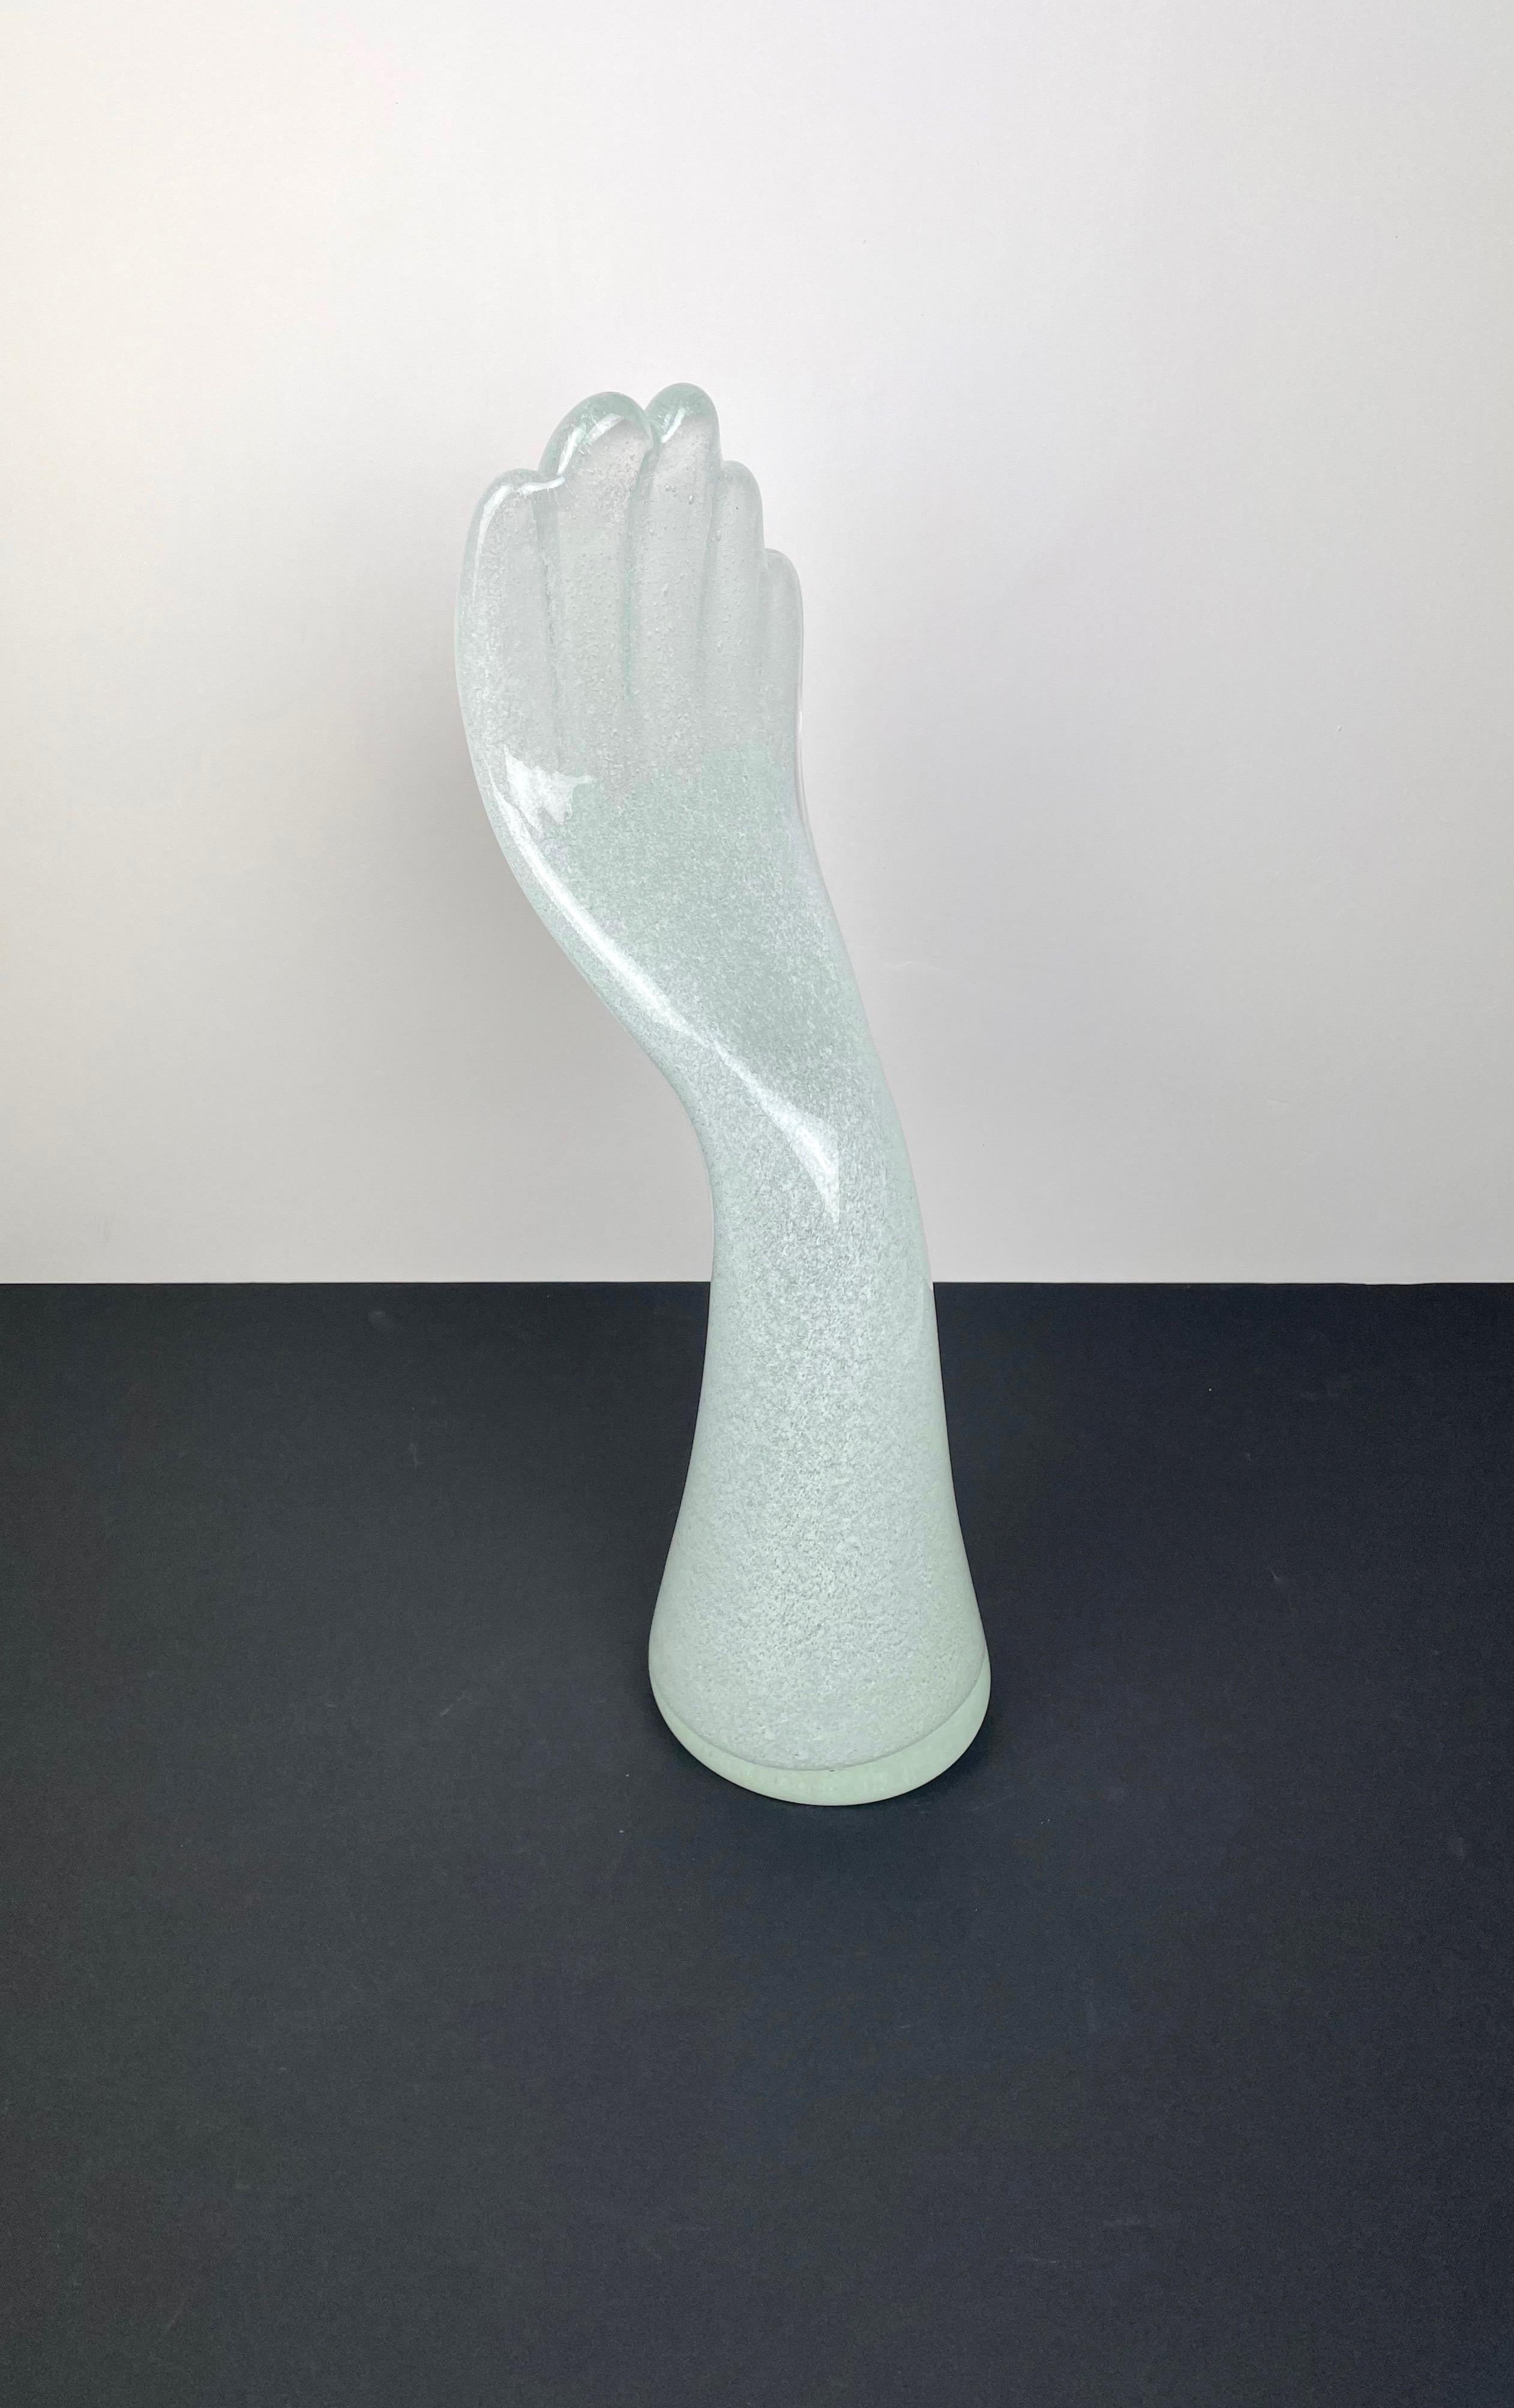 Mid-Century Modern Murano Glass Hand Sculpture Signed Vistosi, Italy For Sale